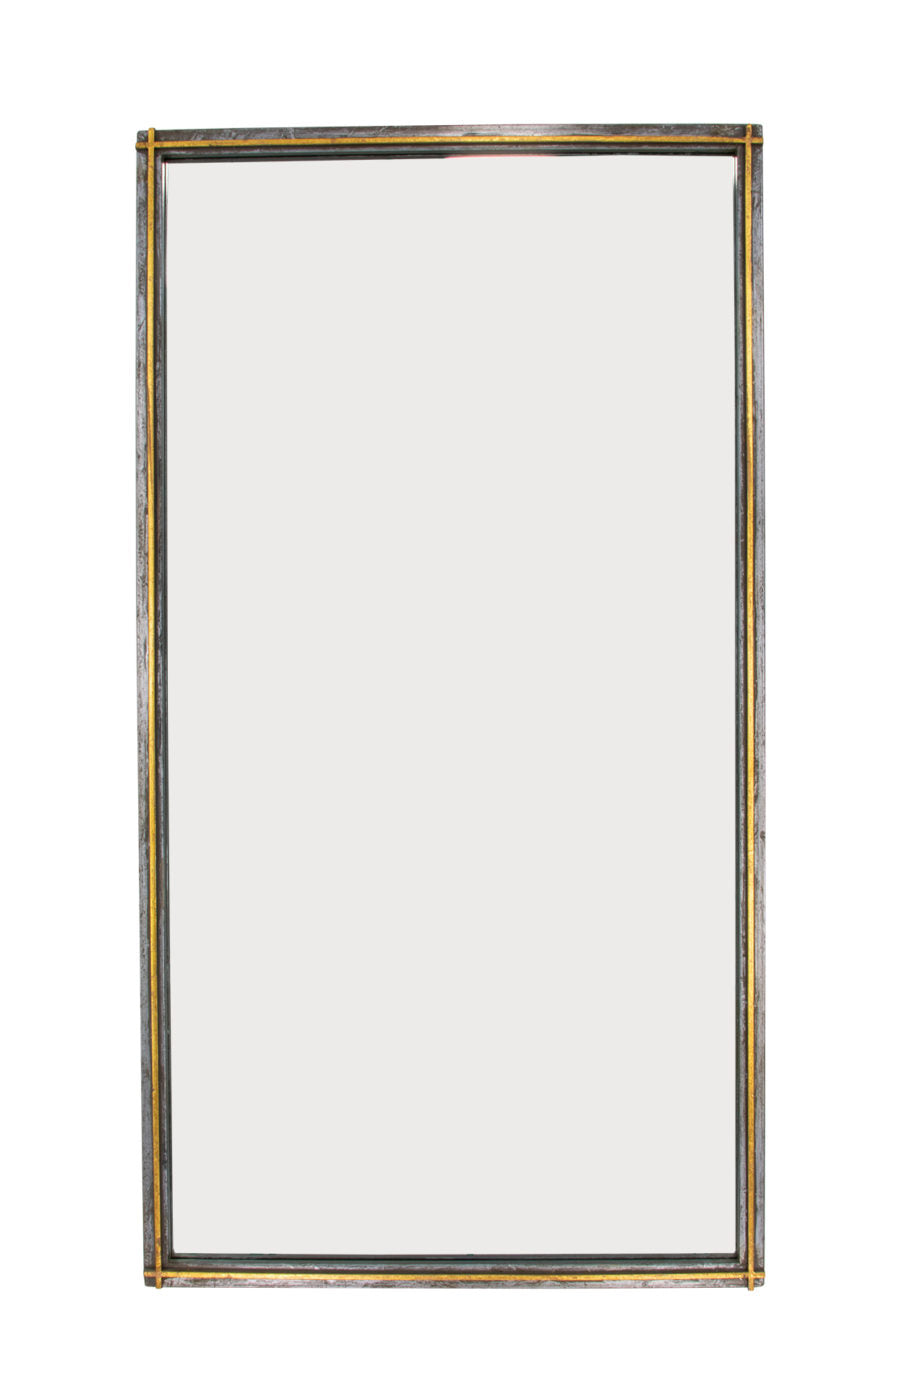 Gray and Gold Mirror